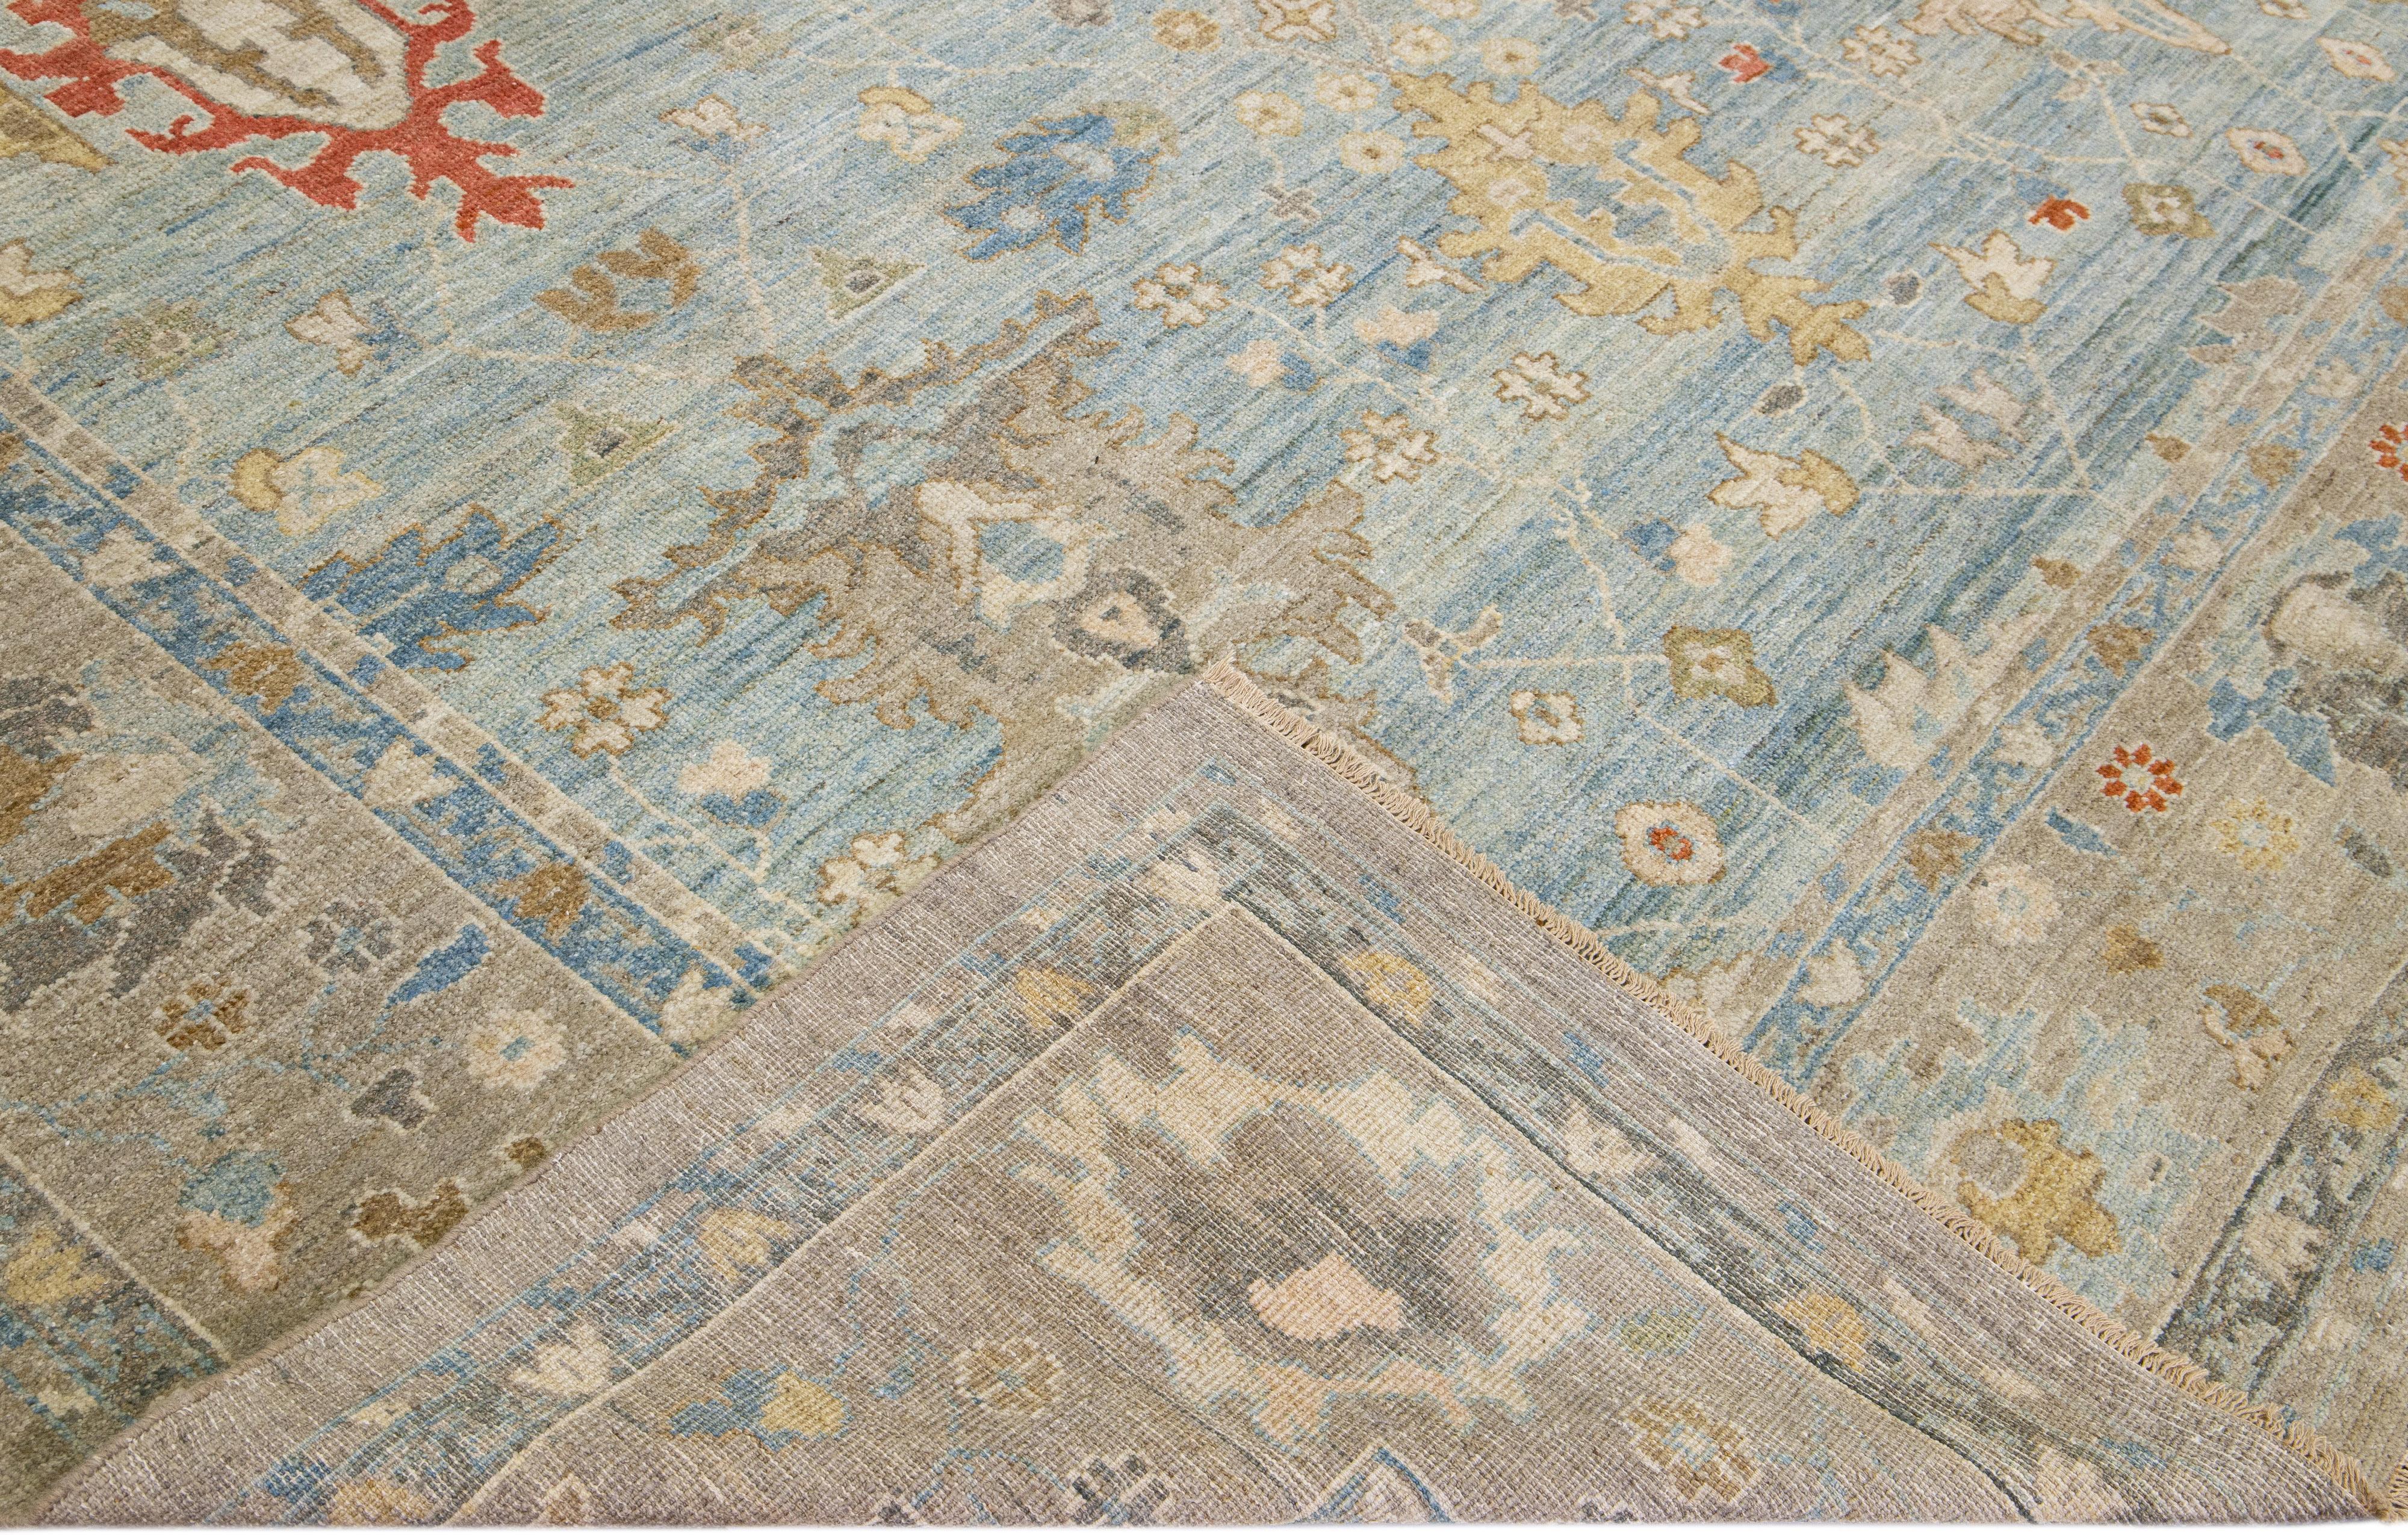 Beautiful modern Sultanabad hand-knotted wool rug with a light blue field. This Sultanabad rug has a brown frame and multicolor accents in a gorgeous all-over classic floral pattern design.

This rug measures: 10'2